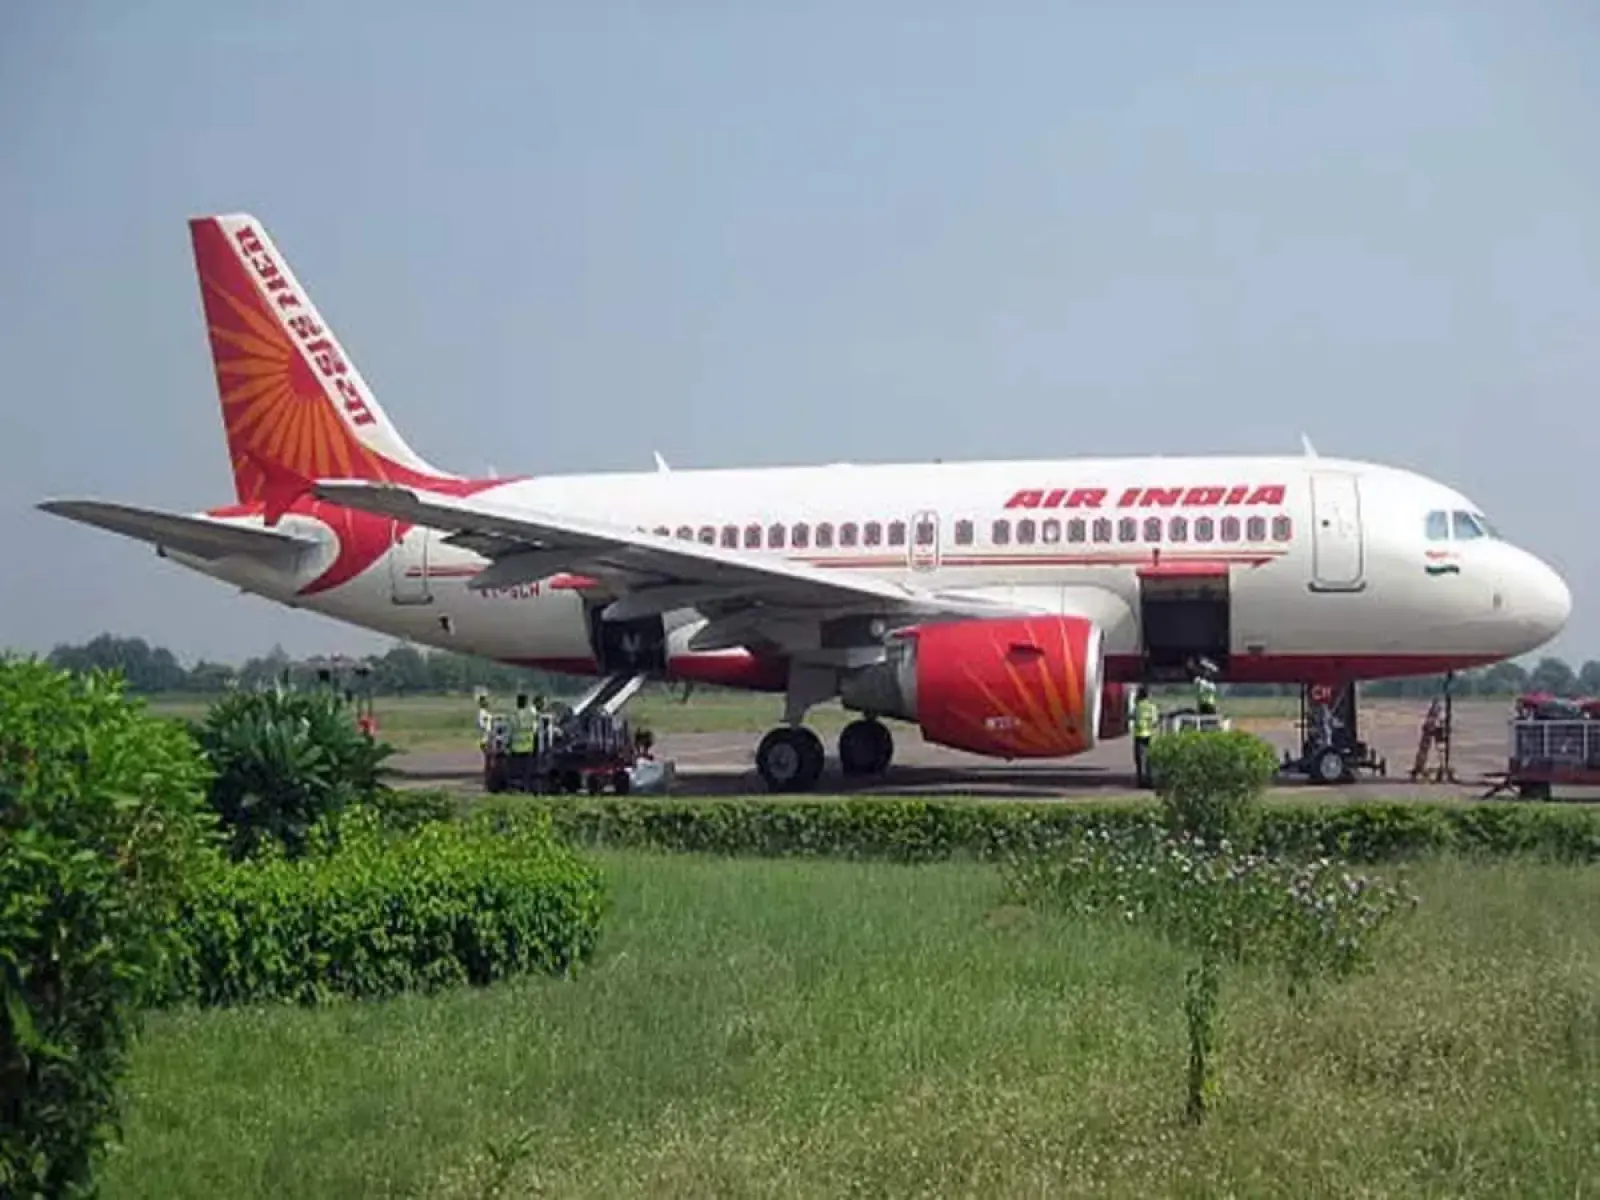 Air India apologizes for the delay in the flight to San Francisco, offers to give travel vouchers worth $350 to passengers